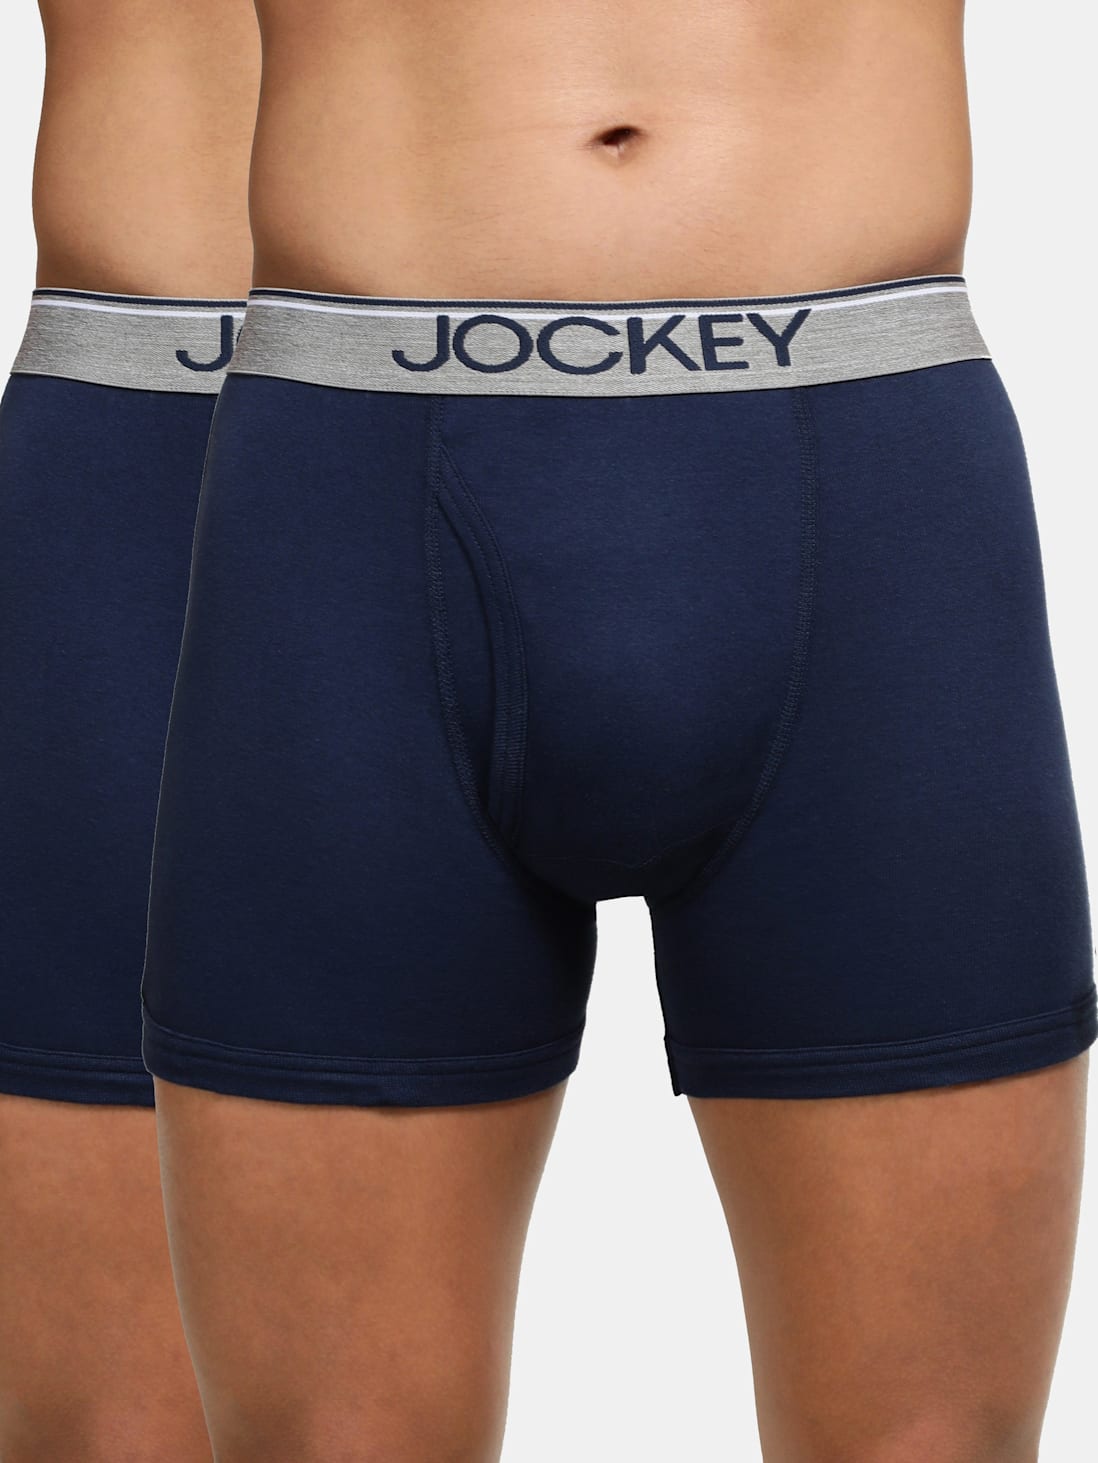 Jockey Men's Super Combed Cotton Rib Solid Boxer Brief 8009 Assorted Pack Of 2 - ShopIMO